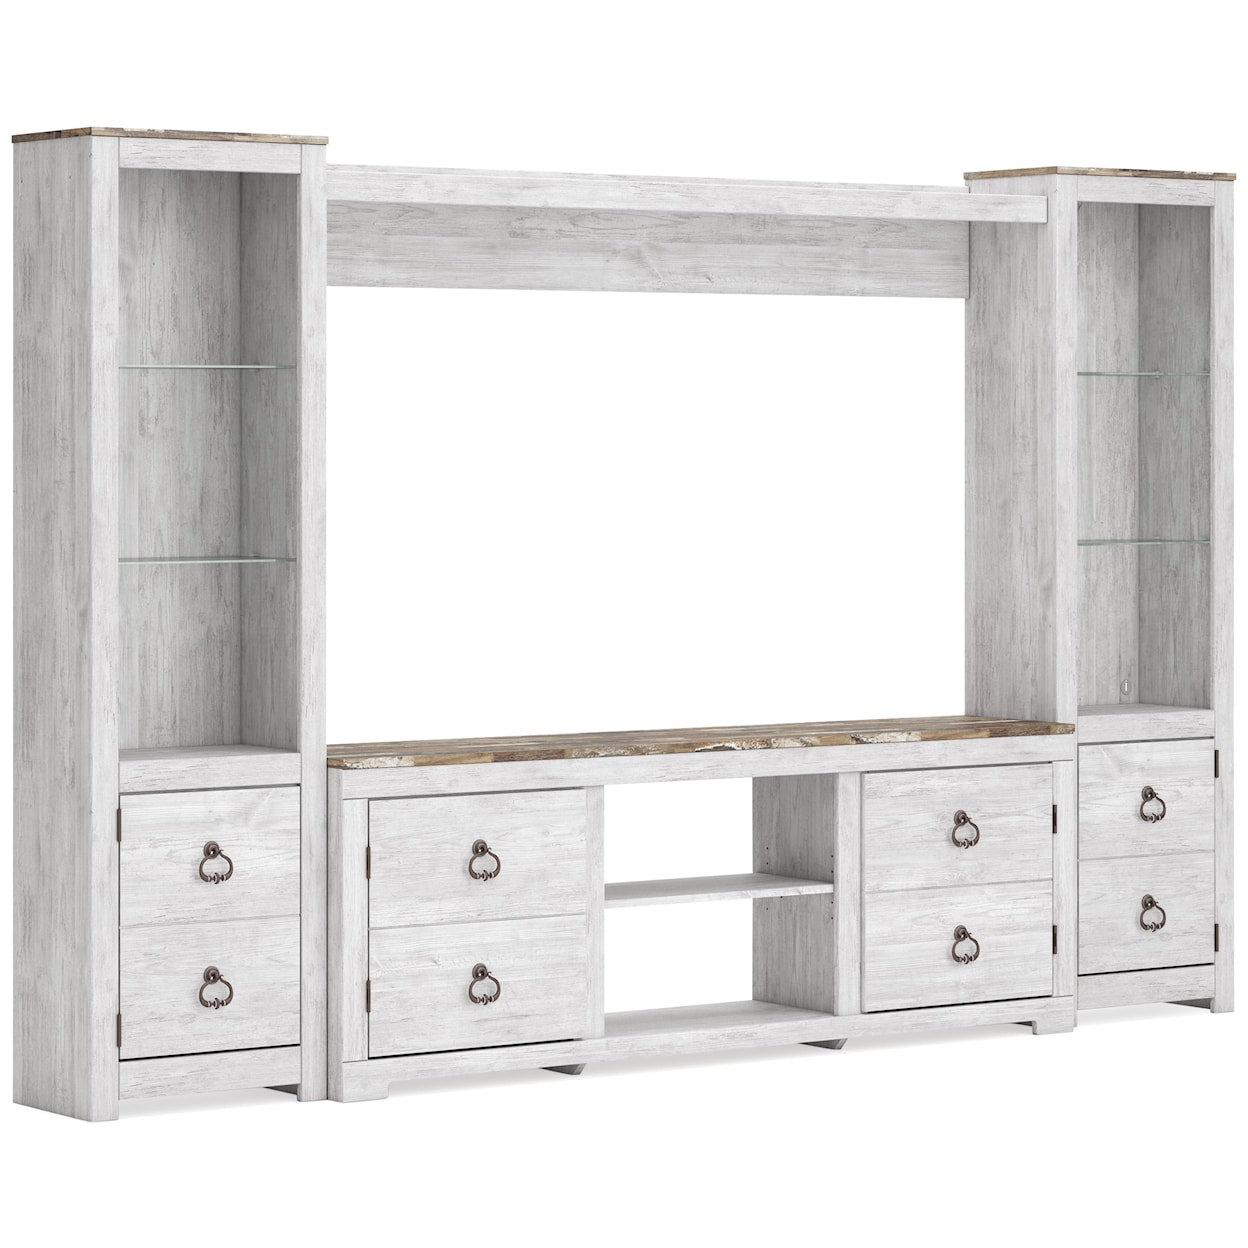 Signature Design by Ashley Furniture Willowton Entertainment Center with Pier Shelves